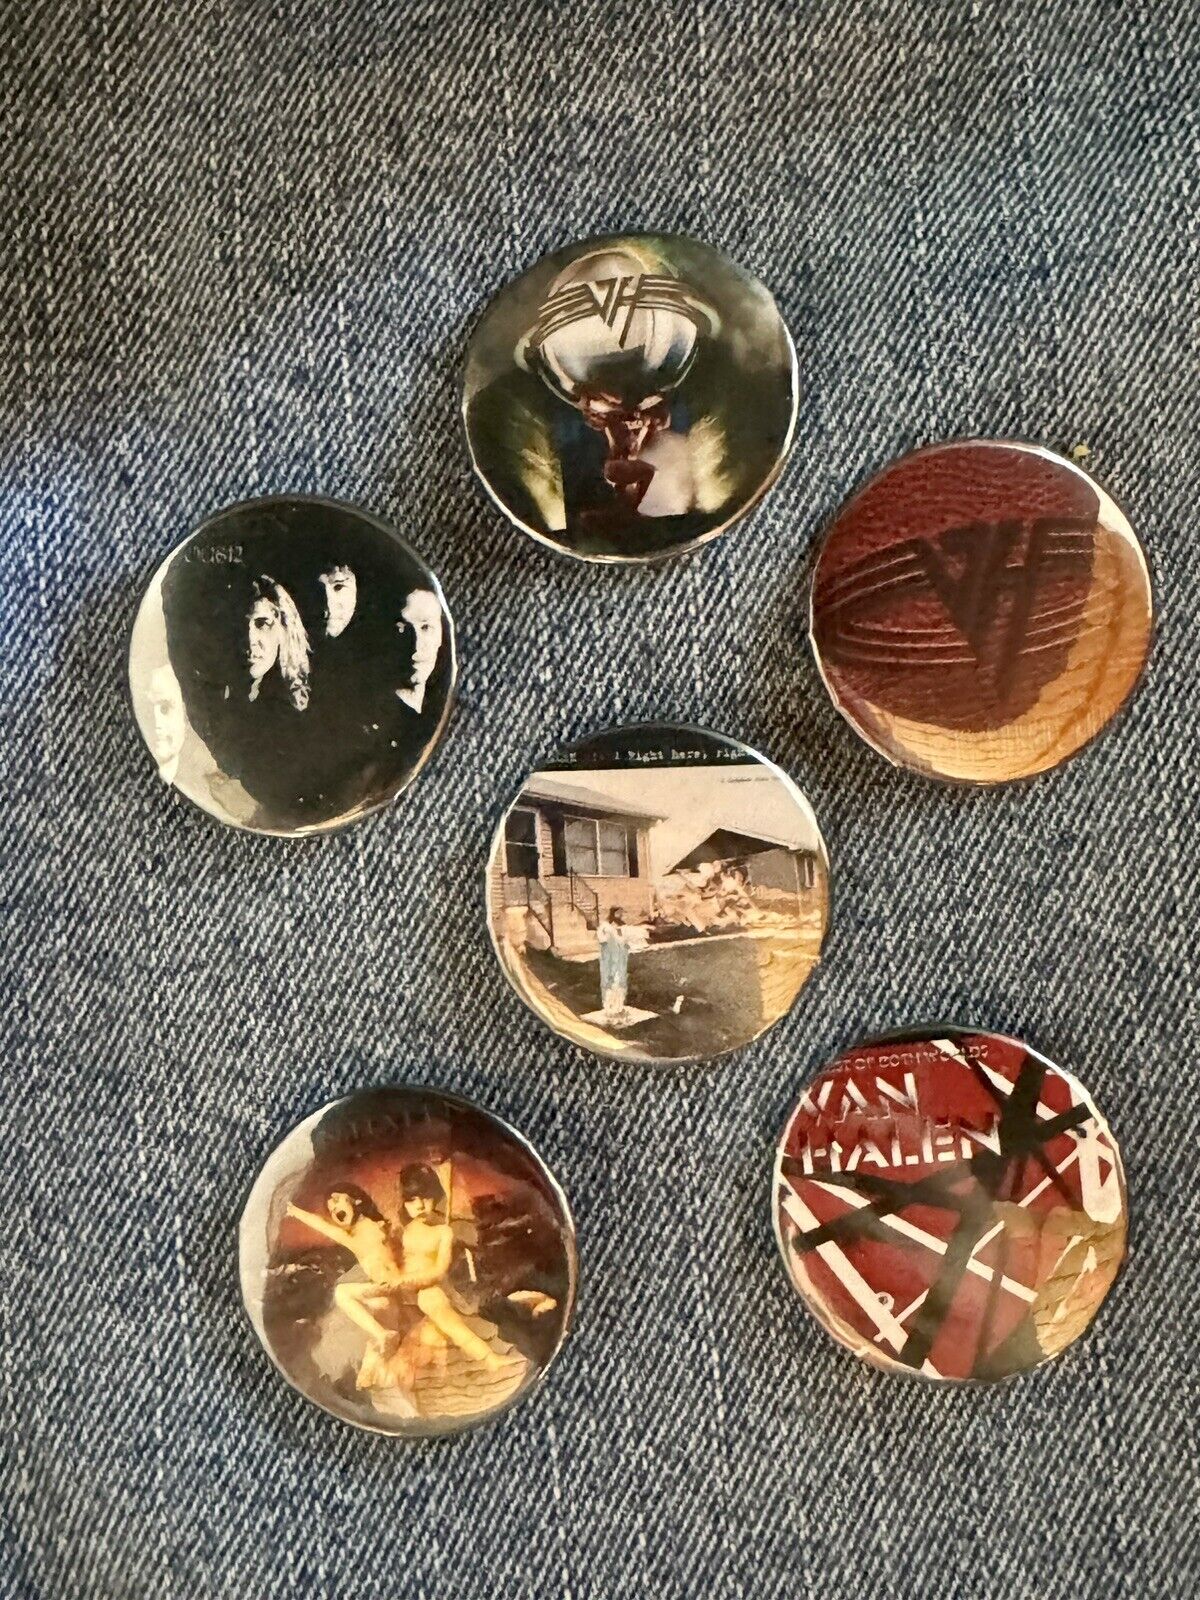 Van Halen (Hagar Era)  “The First 5” Album Covers 1.5” Pin Back Buttons W/ Chase